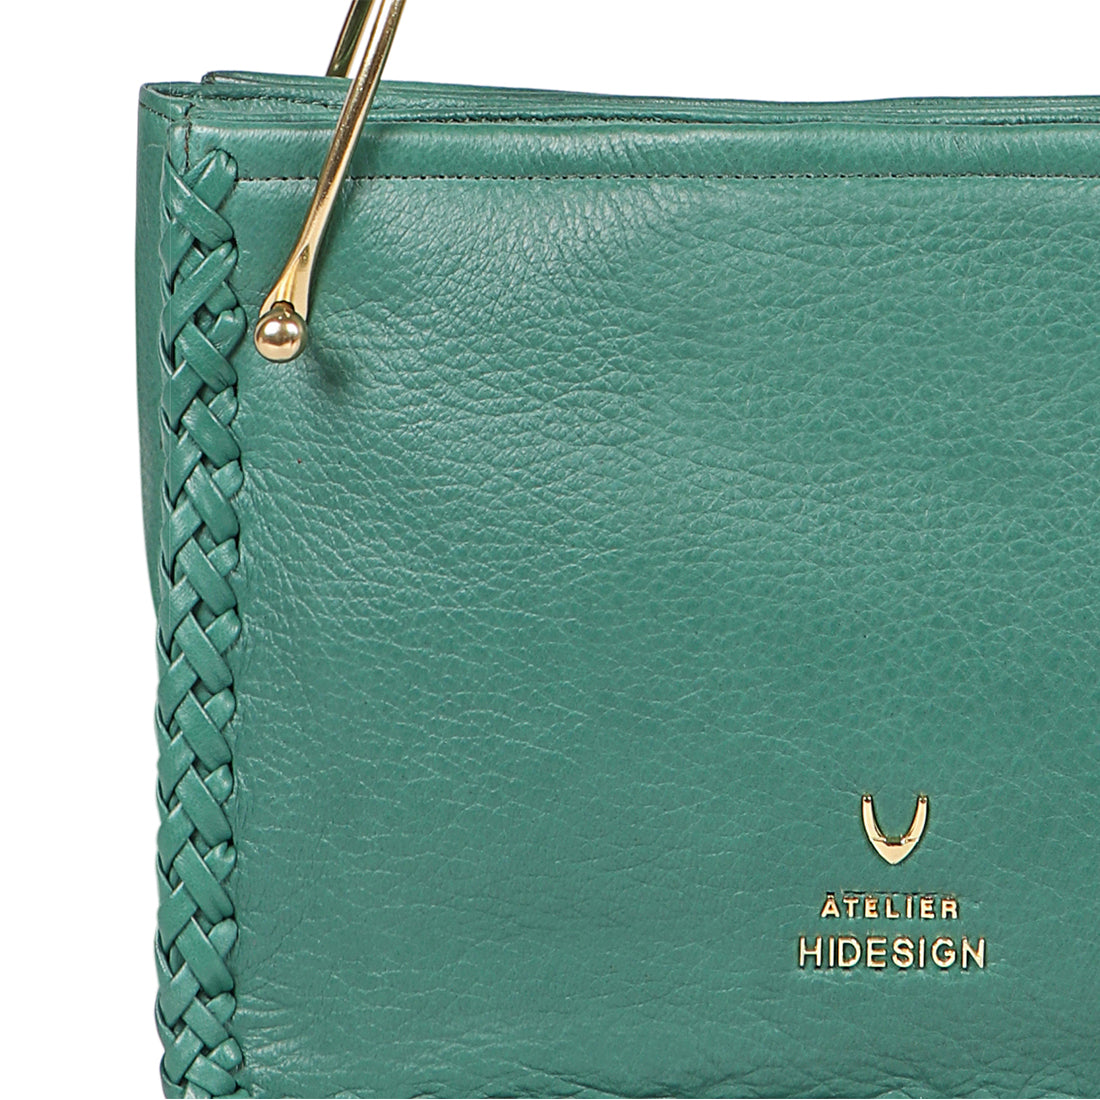 Hidesign Green Textured Leather Structured Shoulder Bag Price in India,  Full Specifications & Offers